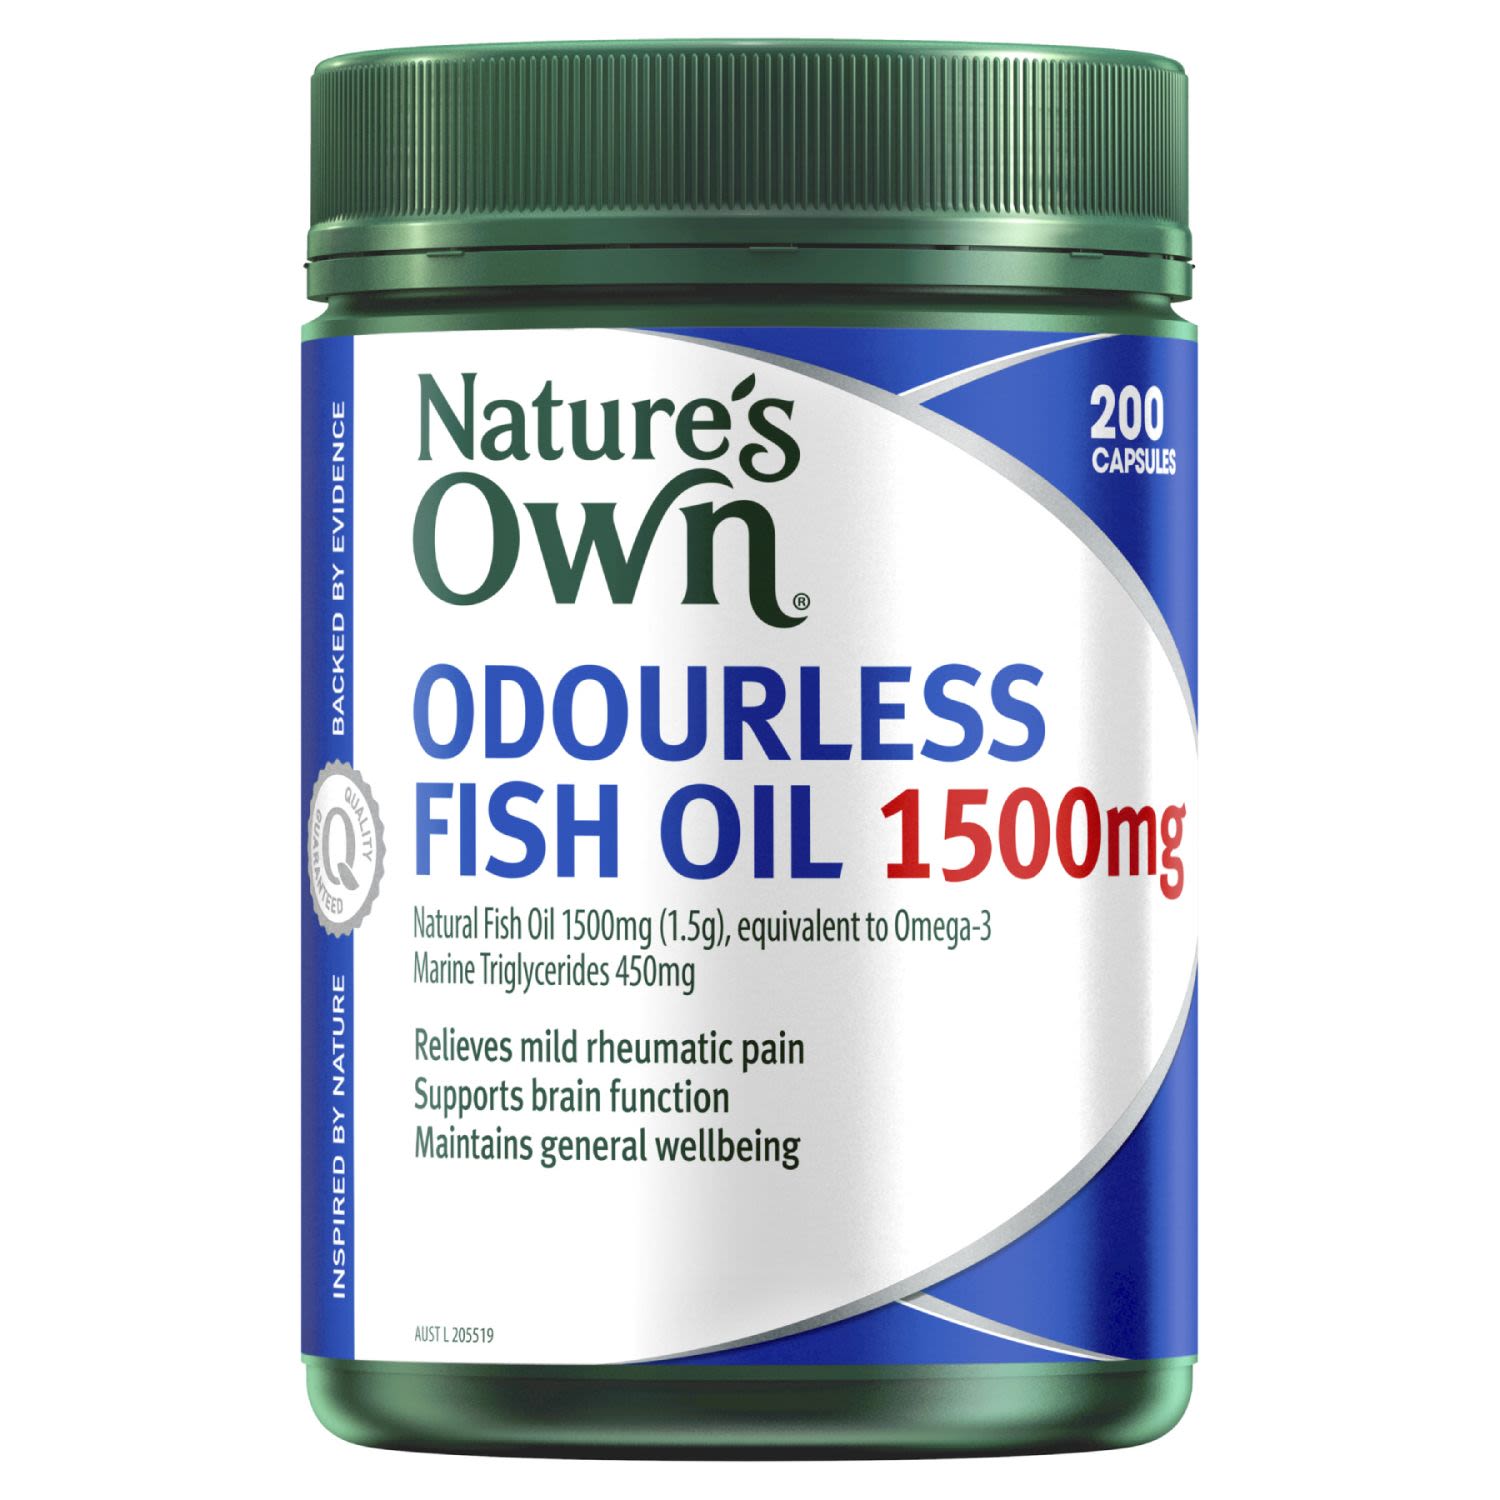 Nature's Own Odourless Fish Oil 1500mg, 200 Each